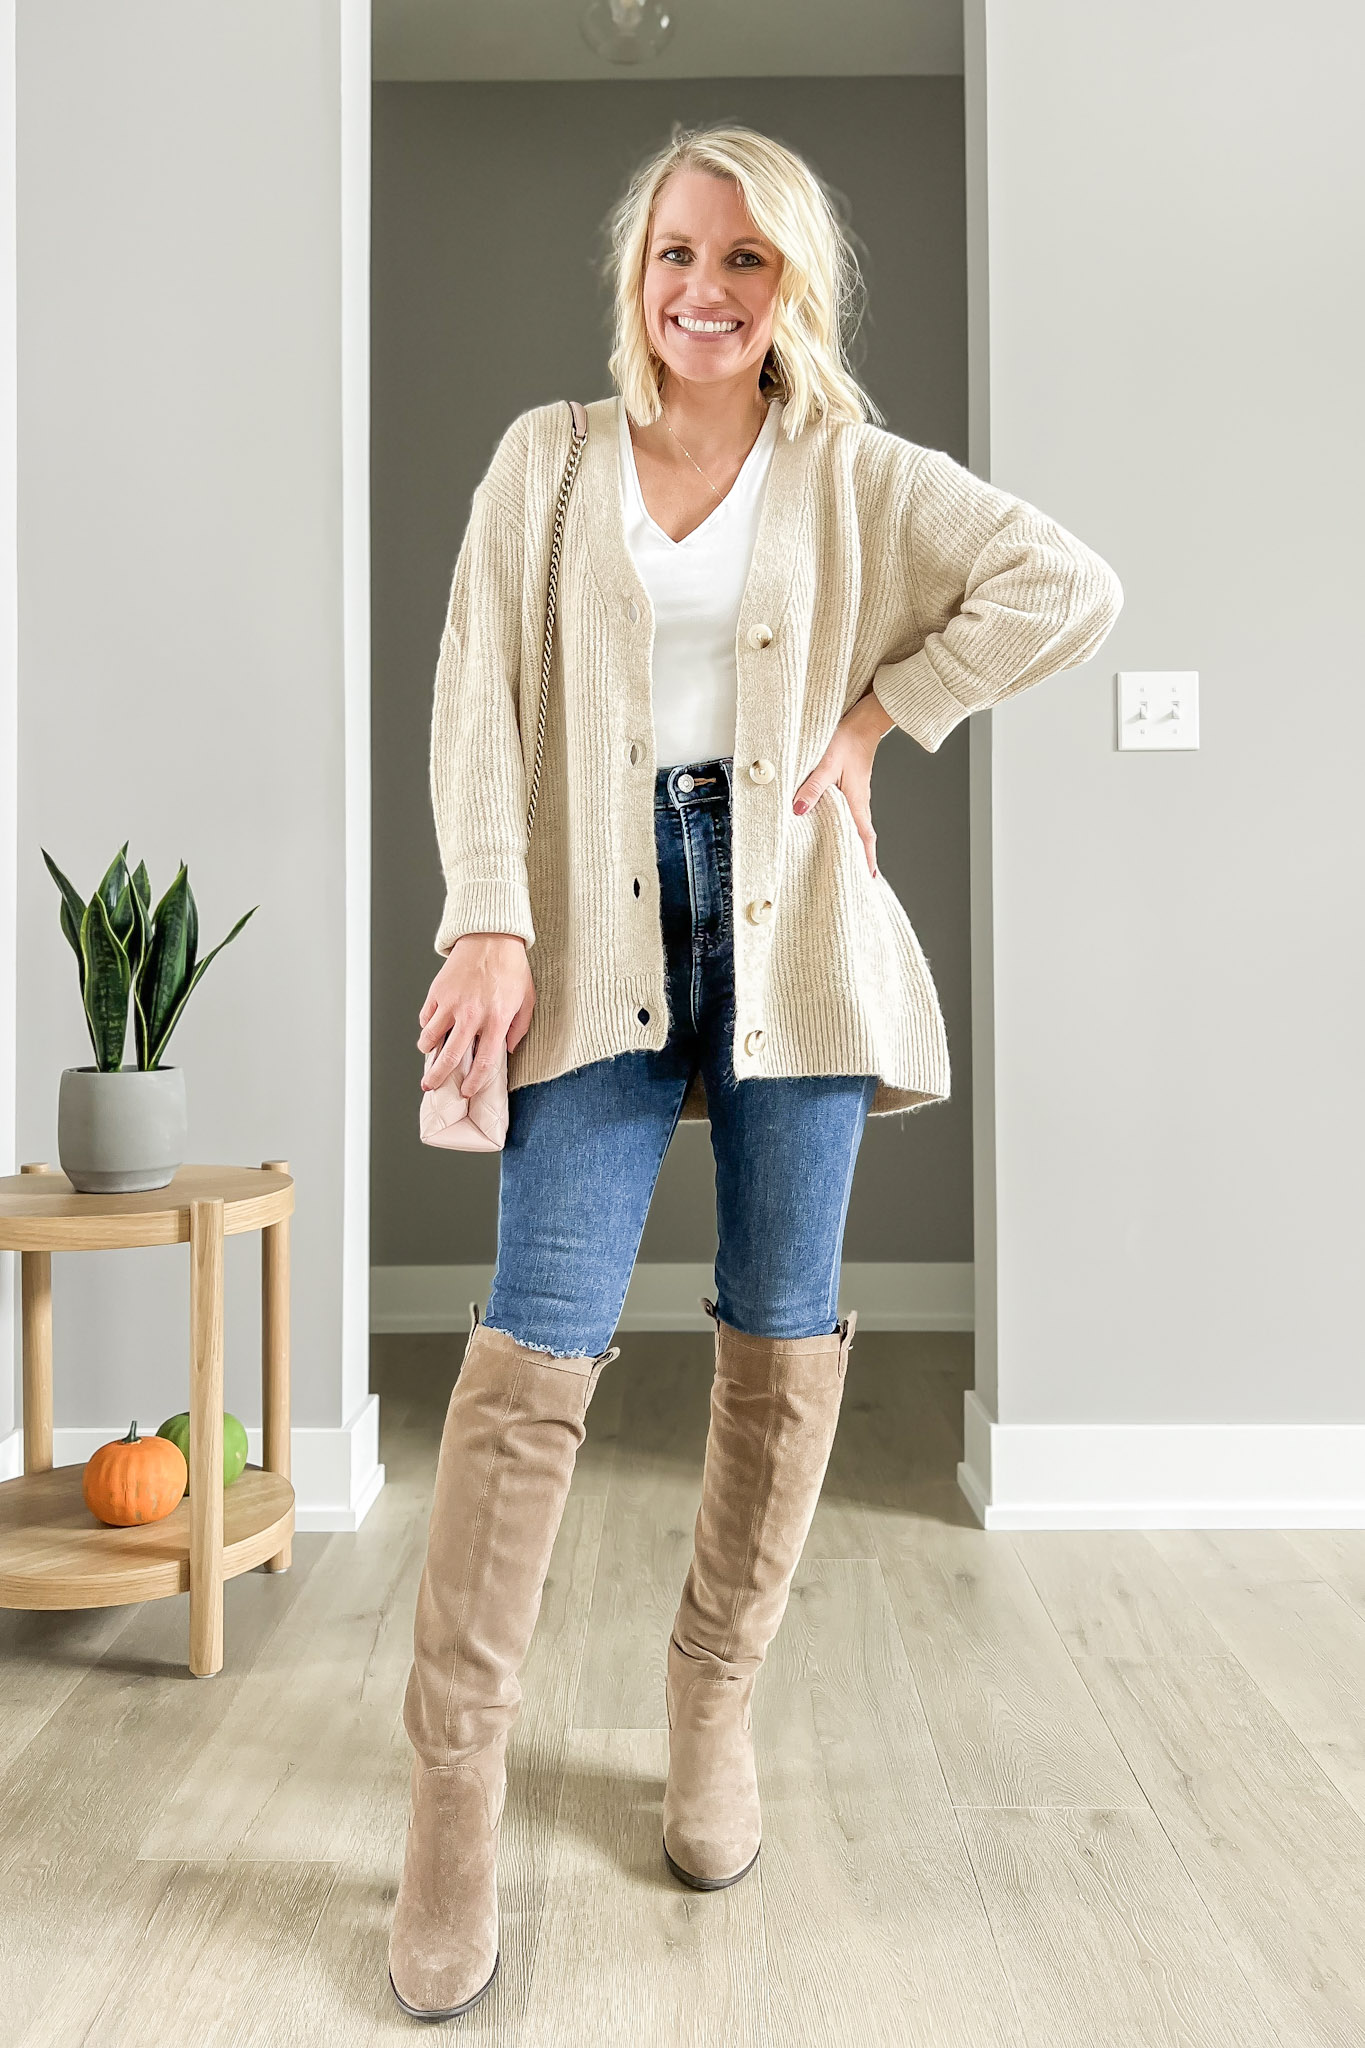 How to wear tall boots- cardigan